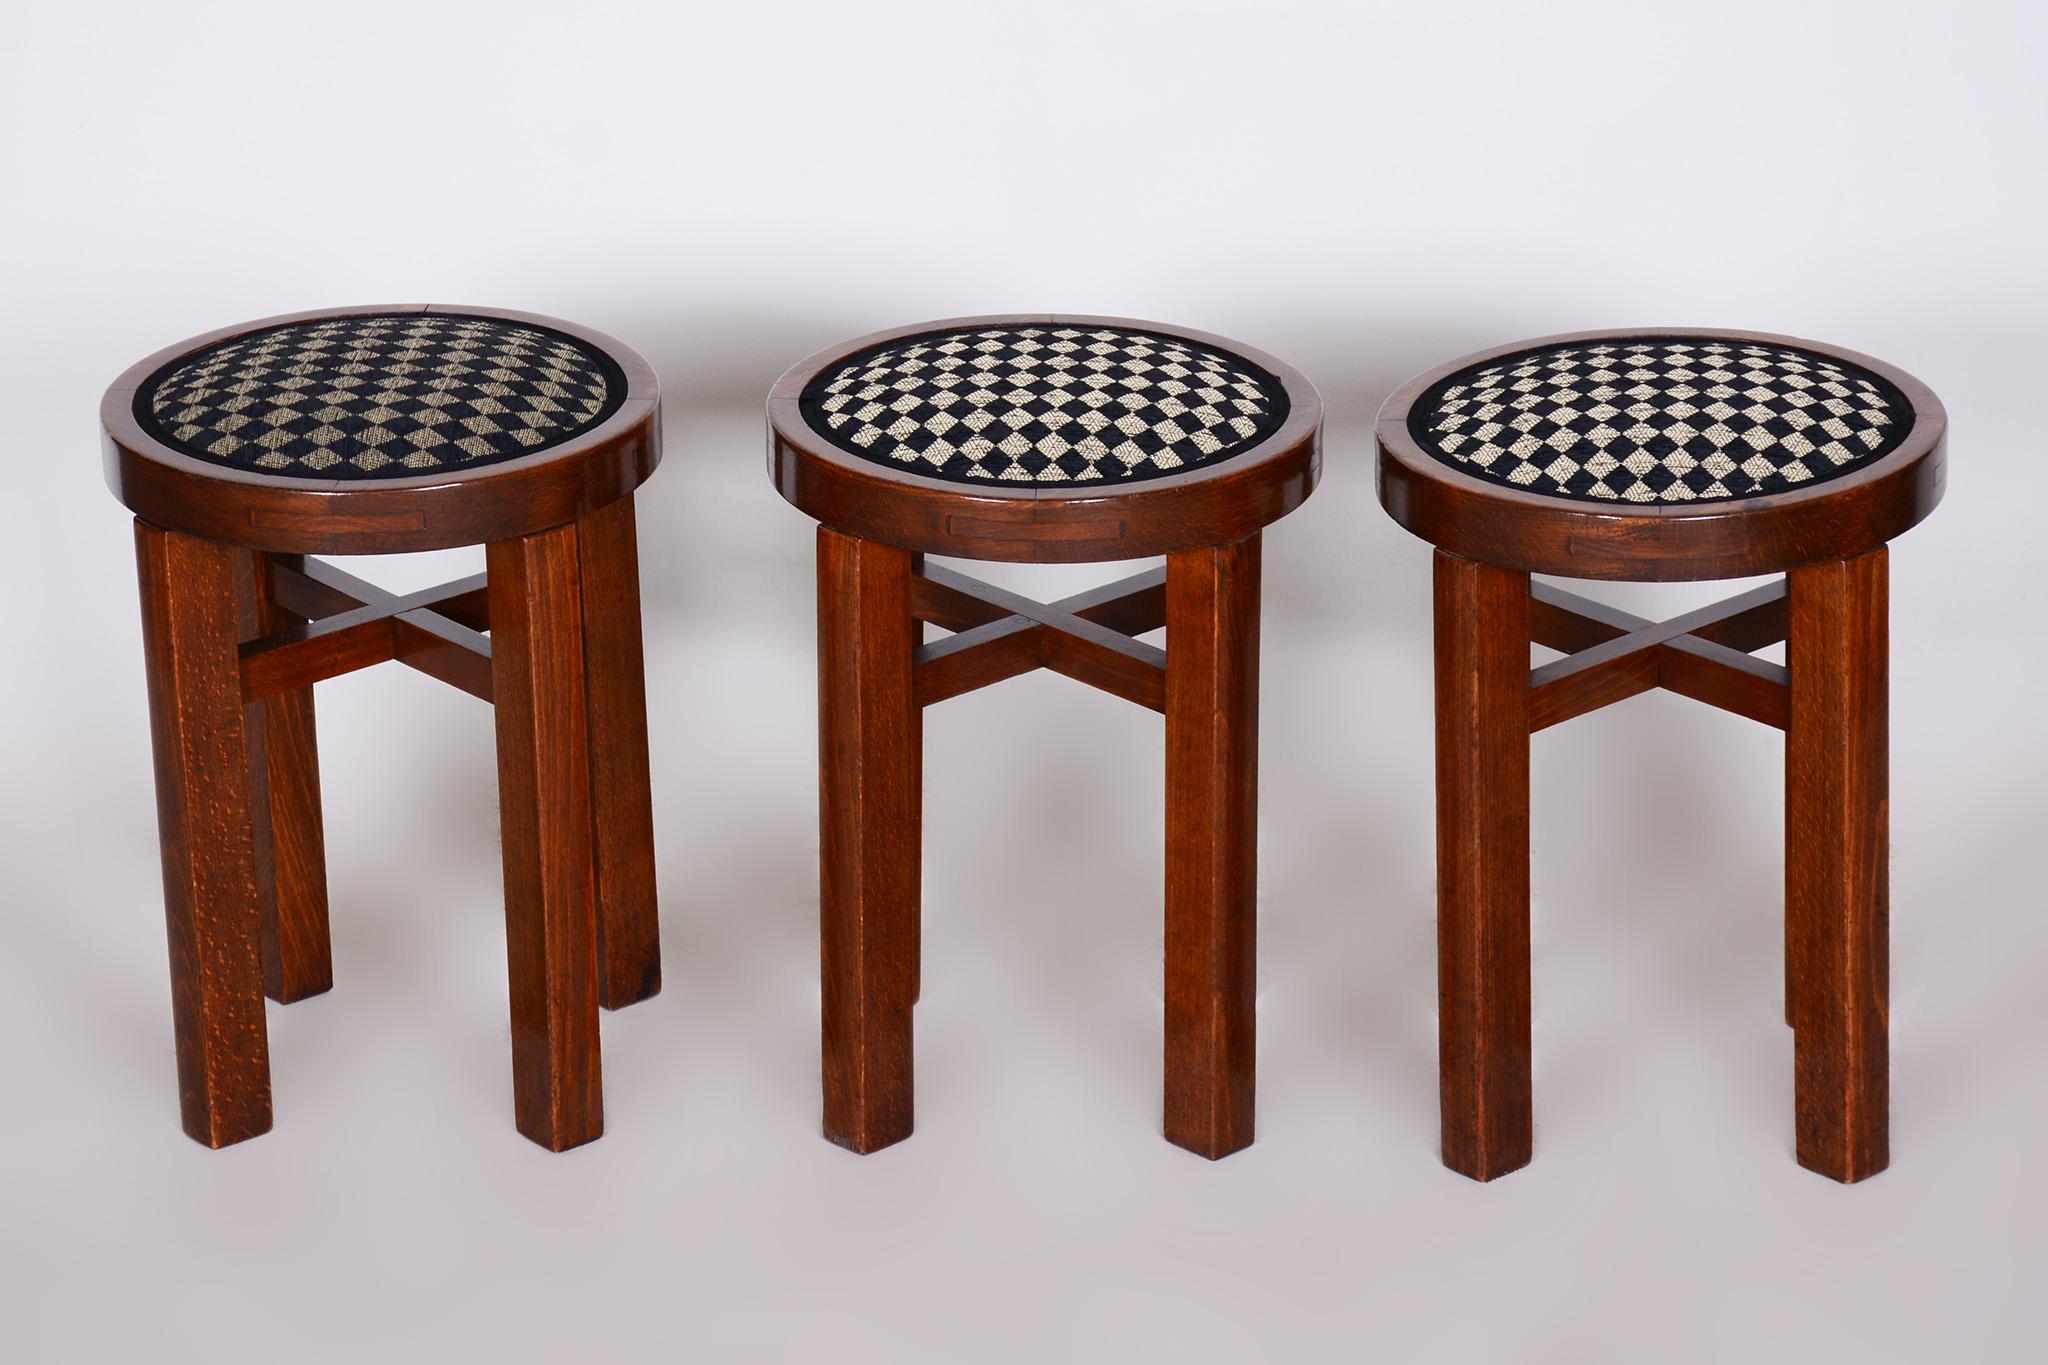 Art Deco foot stools
Completely restored

The wood construction is stable and in perfect condition. Revived polish and new professional upholstery.

Period: 1920-1929
Material: Beech
Source: Czechia (Czechoslovakia).